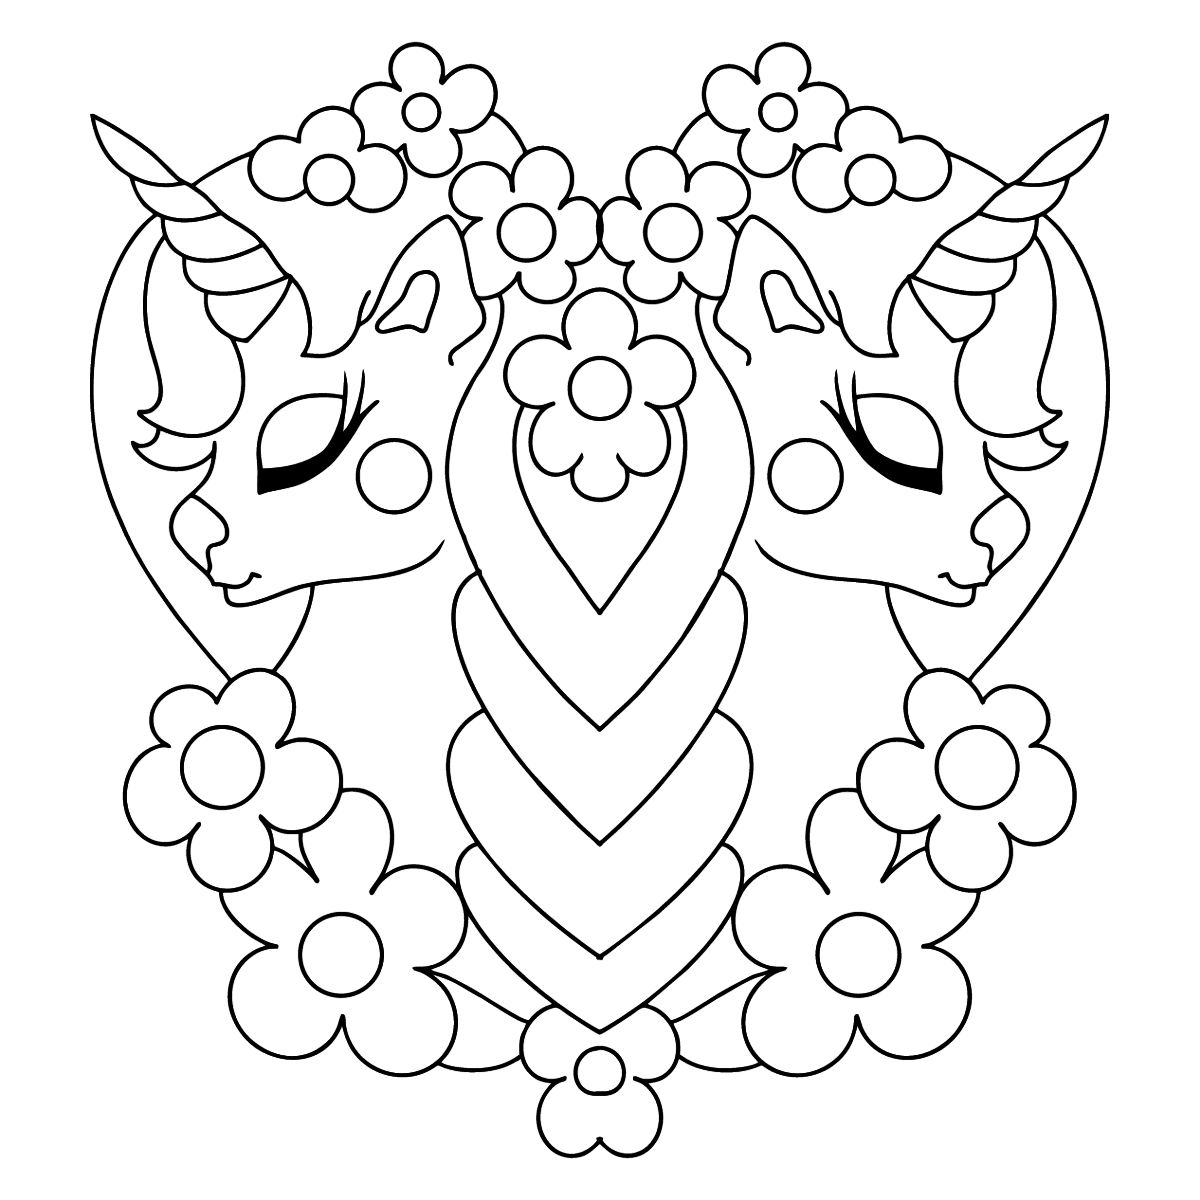 Simple Coloring Book Adorable Unicorn ♥ Online and Print for Free